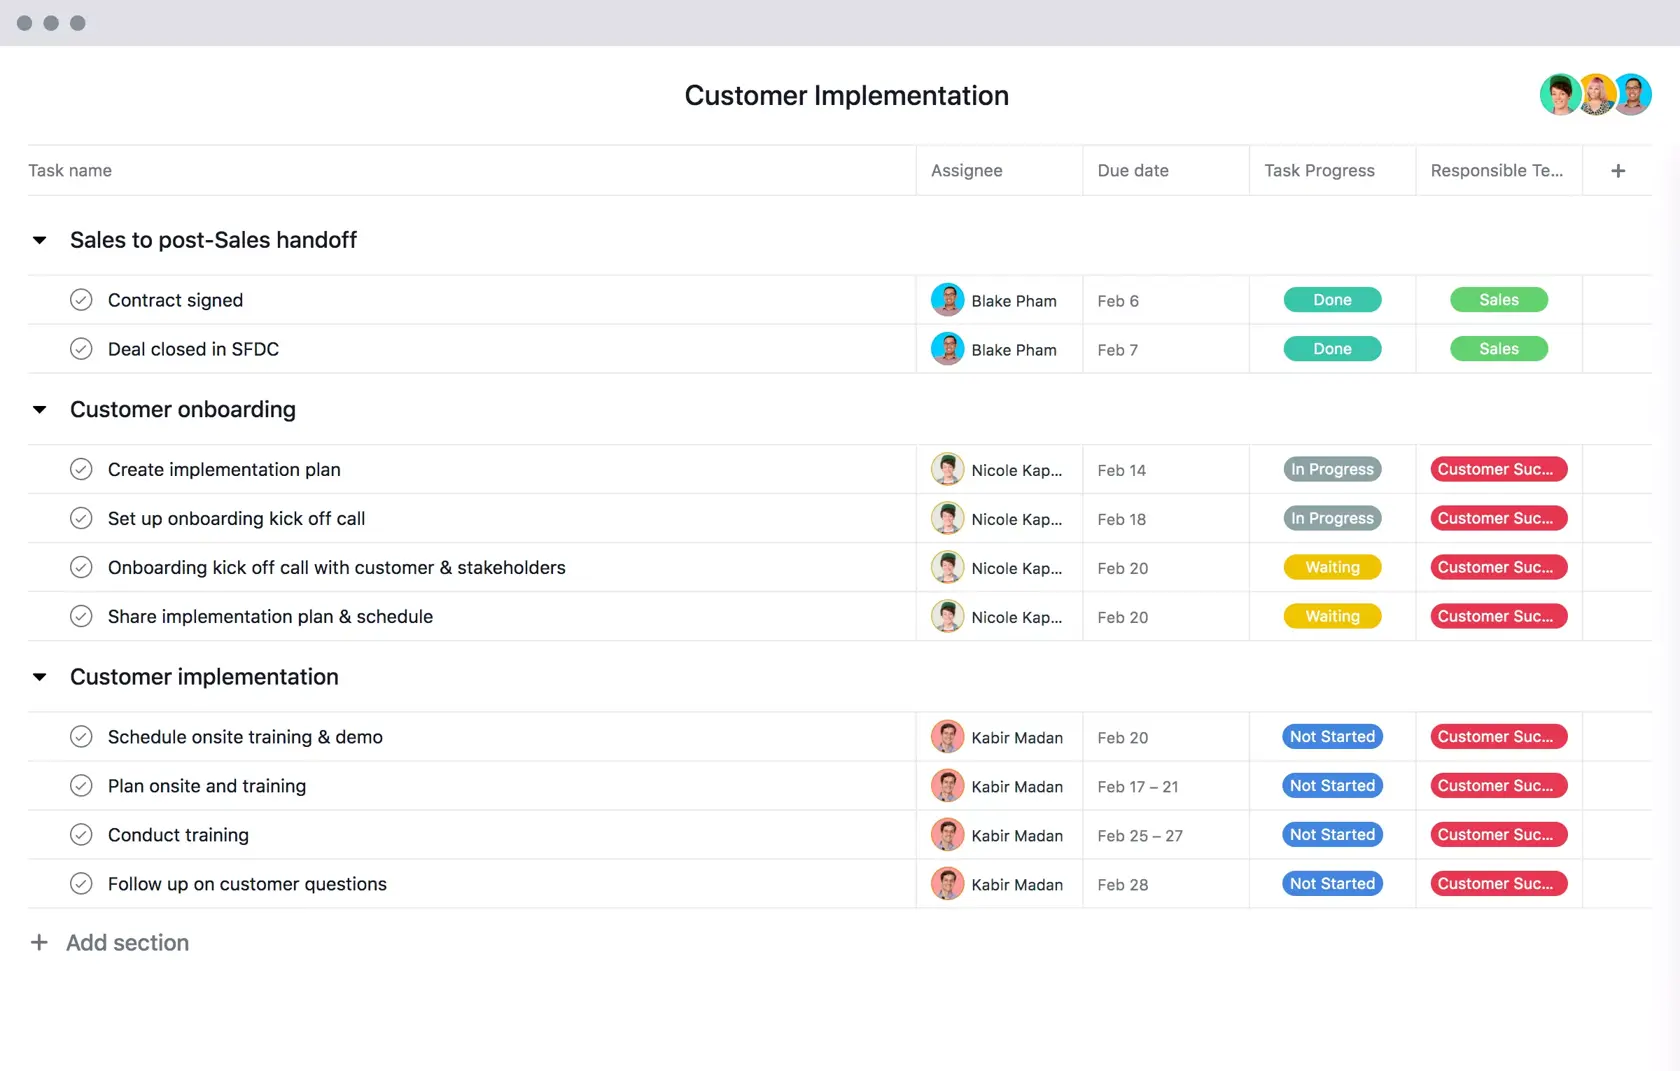 [Old product ui] Customer implementation template in Asana, spreadsheet-style project view (List)